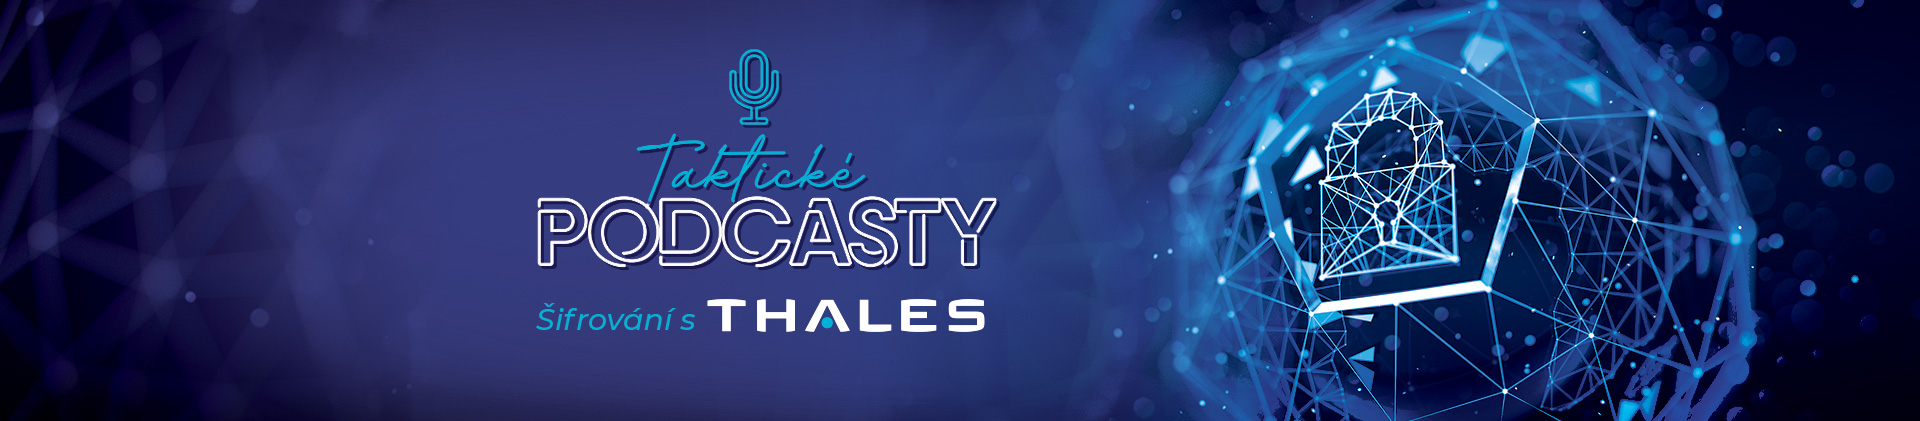 Podcasty s THALES